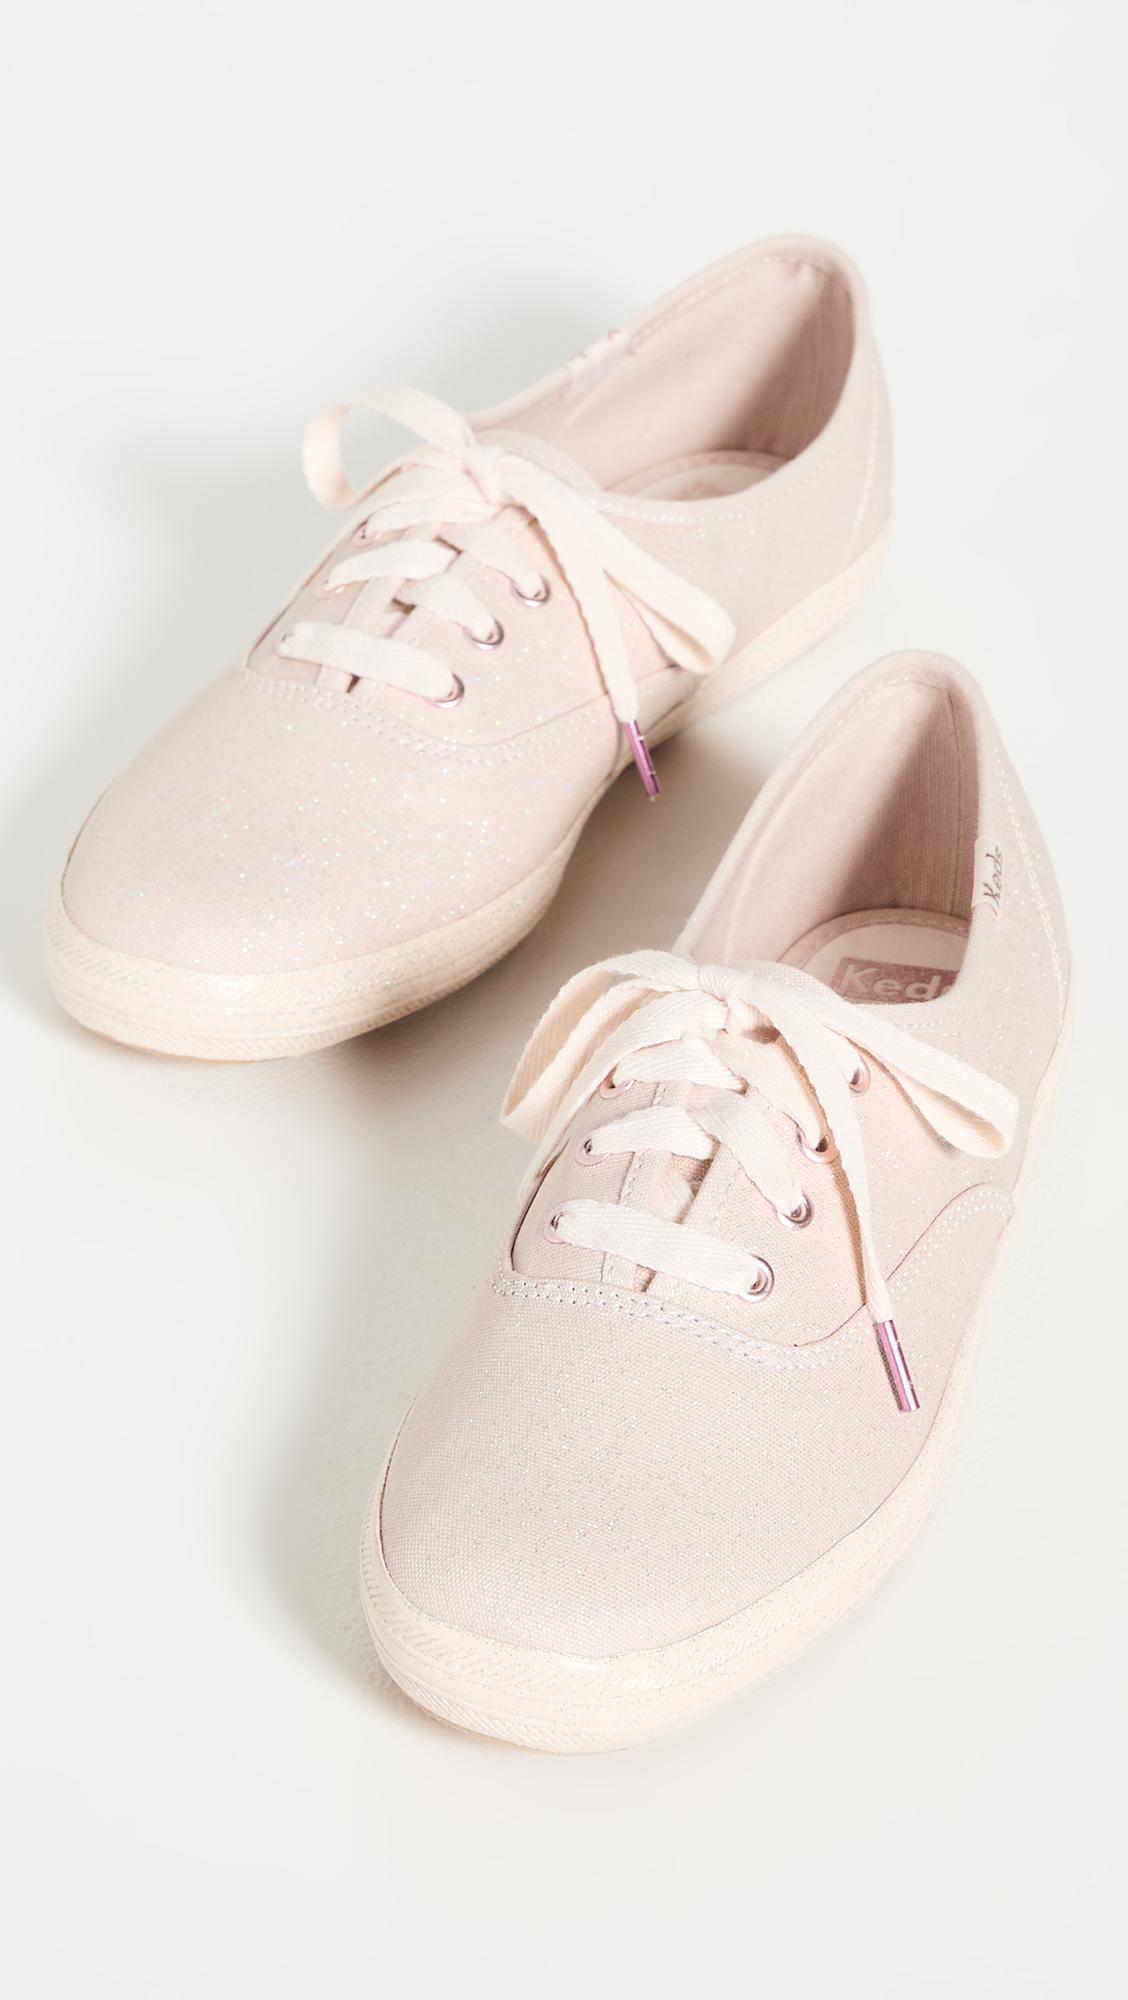 Keds X Kate Spade New York Champion Glitter Sneakers in Pink | Lyst